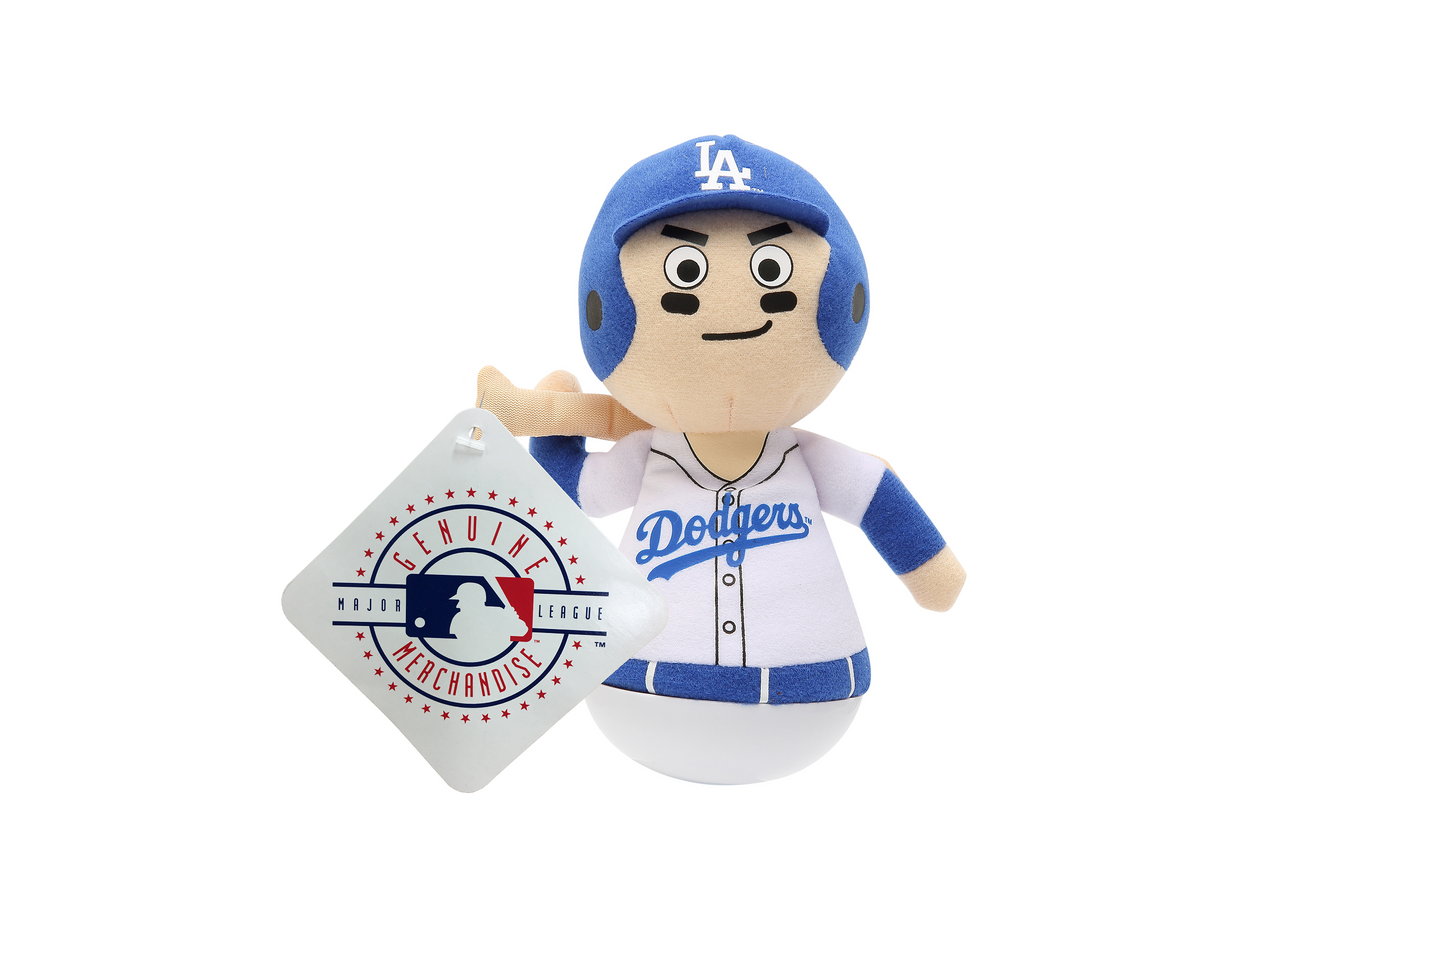 MLB Rock'emz Collectible Sports Figurine - 7 in. tall (Los Angeles Dodgers)